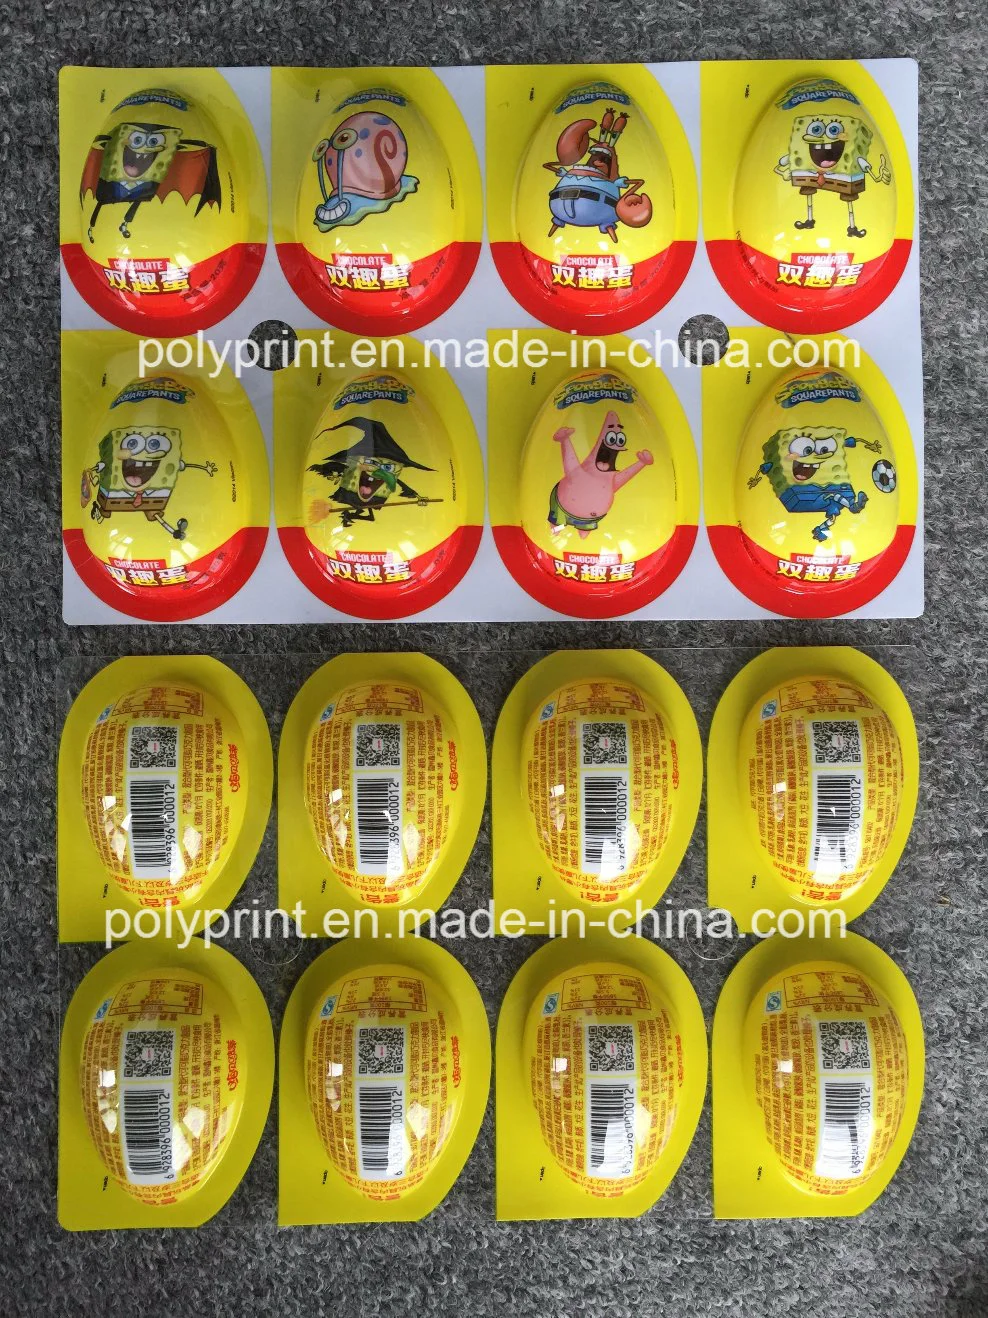 Automatic Plastic Disposable Cup Lid/Cover Fast Food Tray Clamshell Thermoforming Forming Making Machine